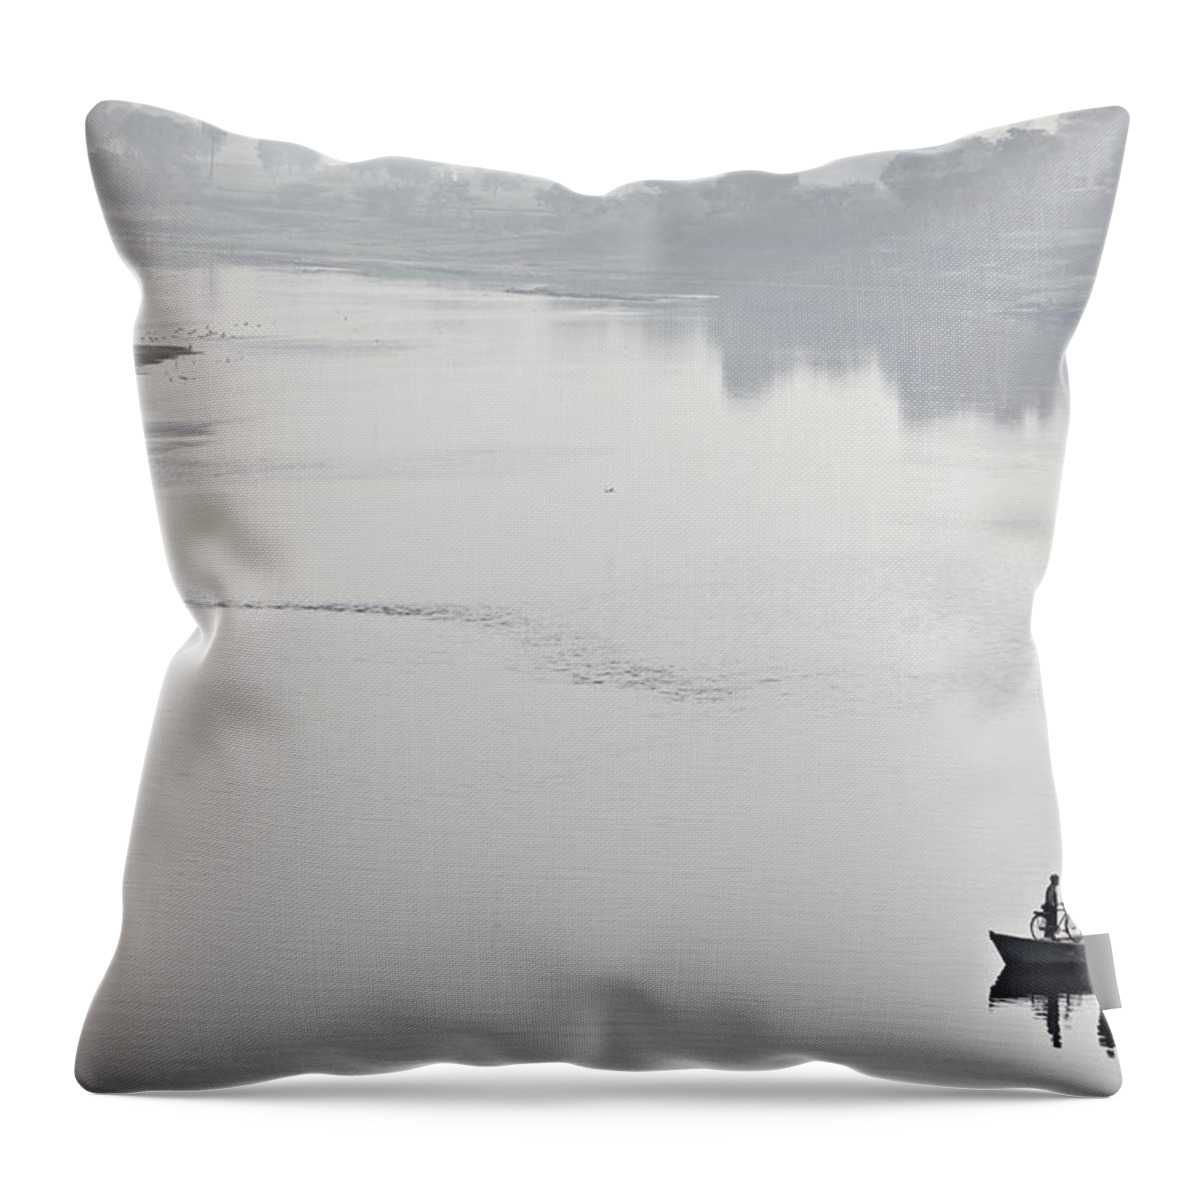 People Throw Pillow featuring the photograph River Yamuna by Bjarte Rettedal